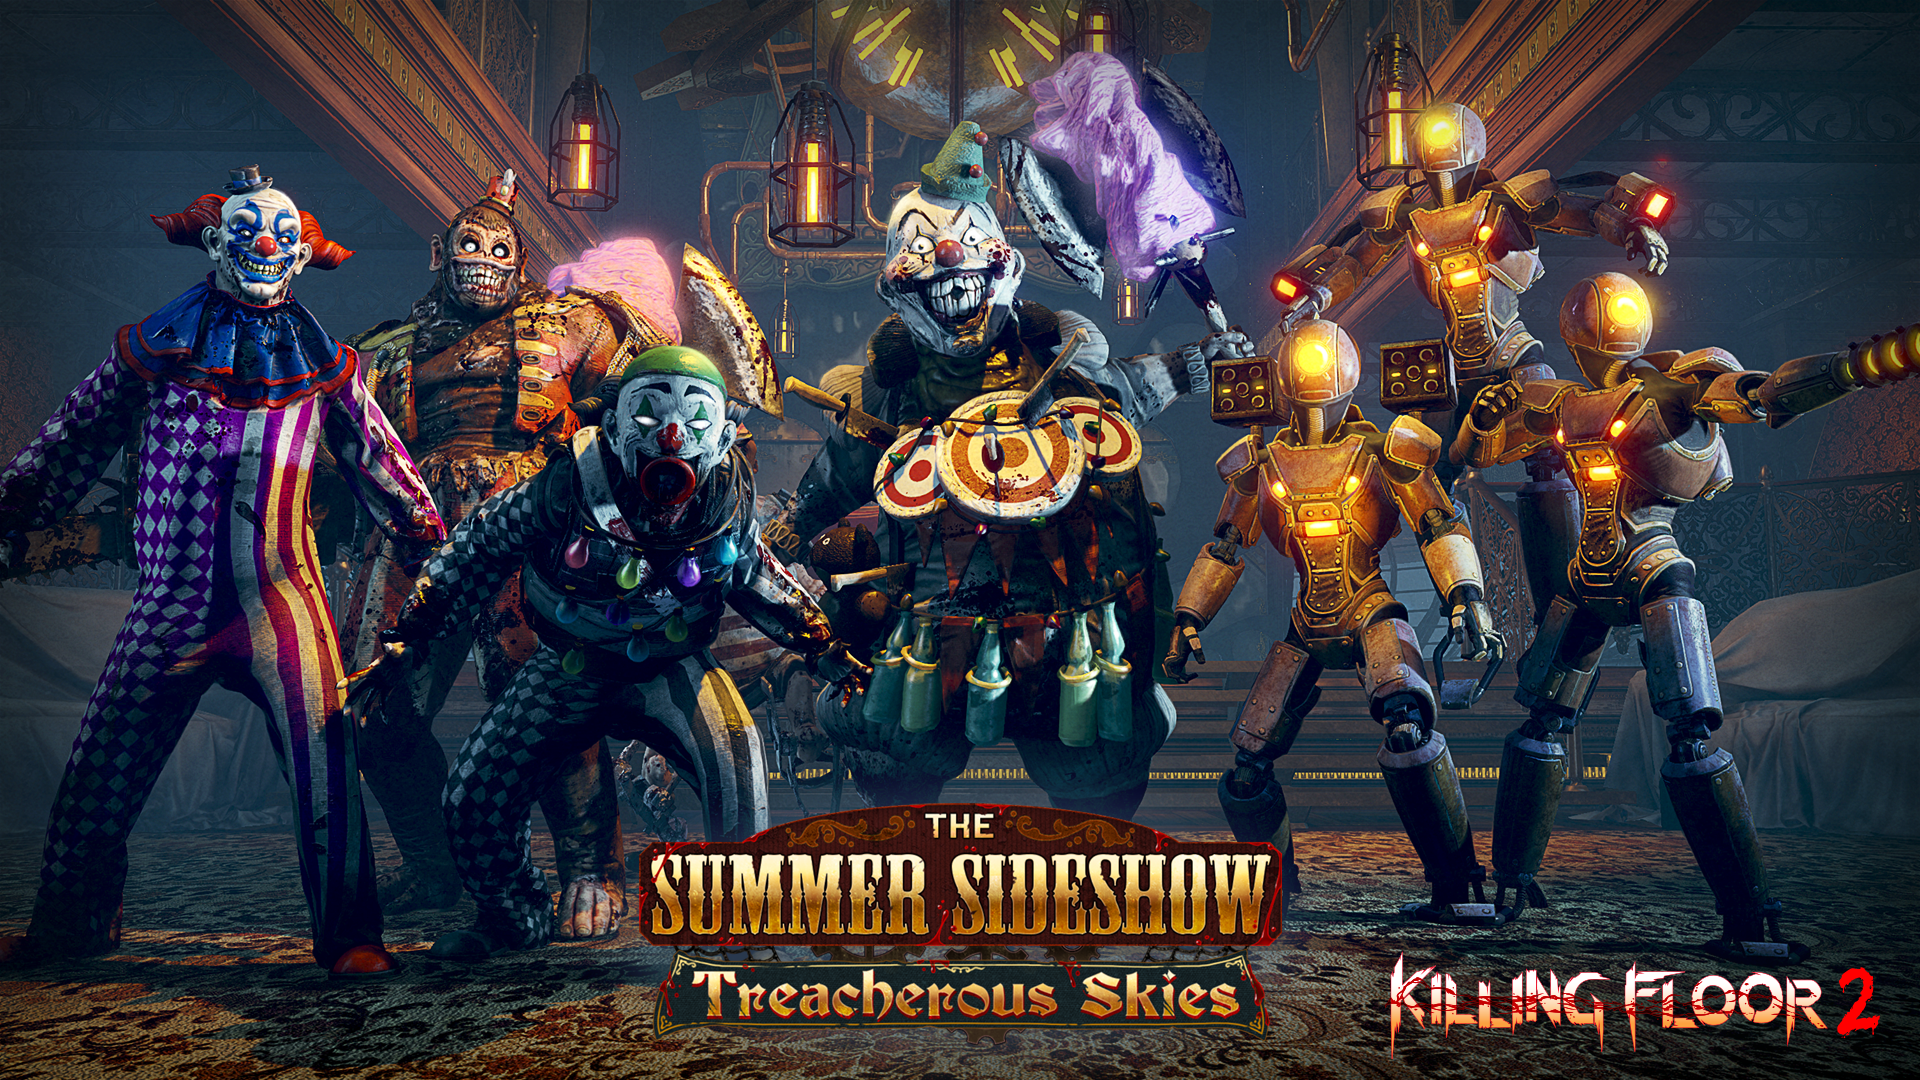 Killing Floor 2 The Summer Sideshow Treacherous Skies Update Takes Flight On June 12 For Pc And Consoles One Pr Studio